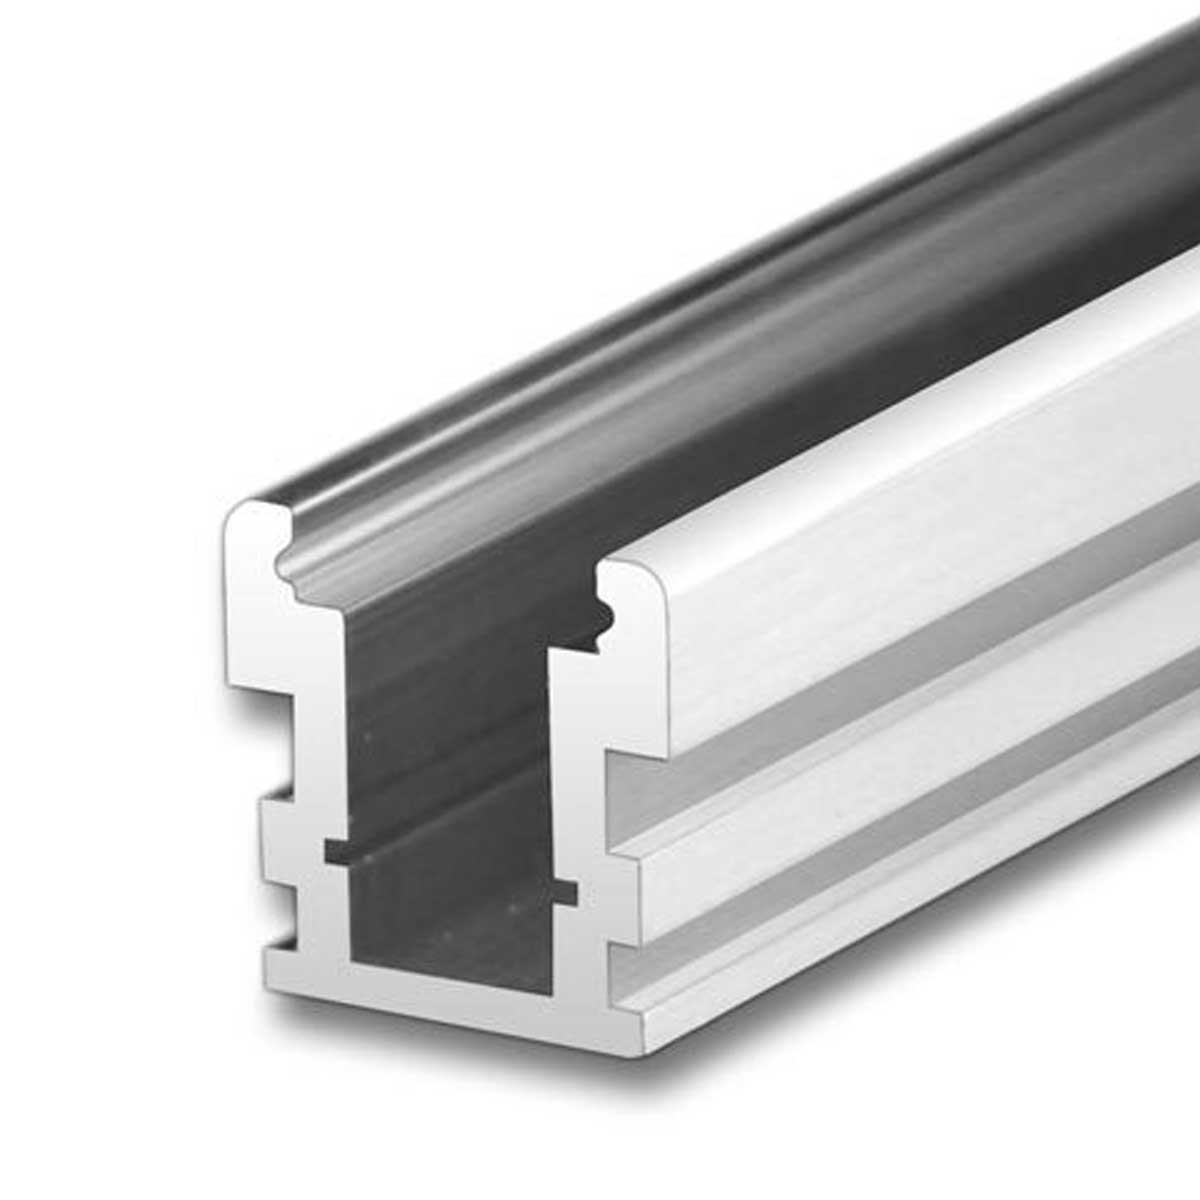 1000 Aluminium Slotted Channel Manufacturers, Suppliers in Srinagar